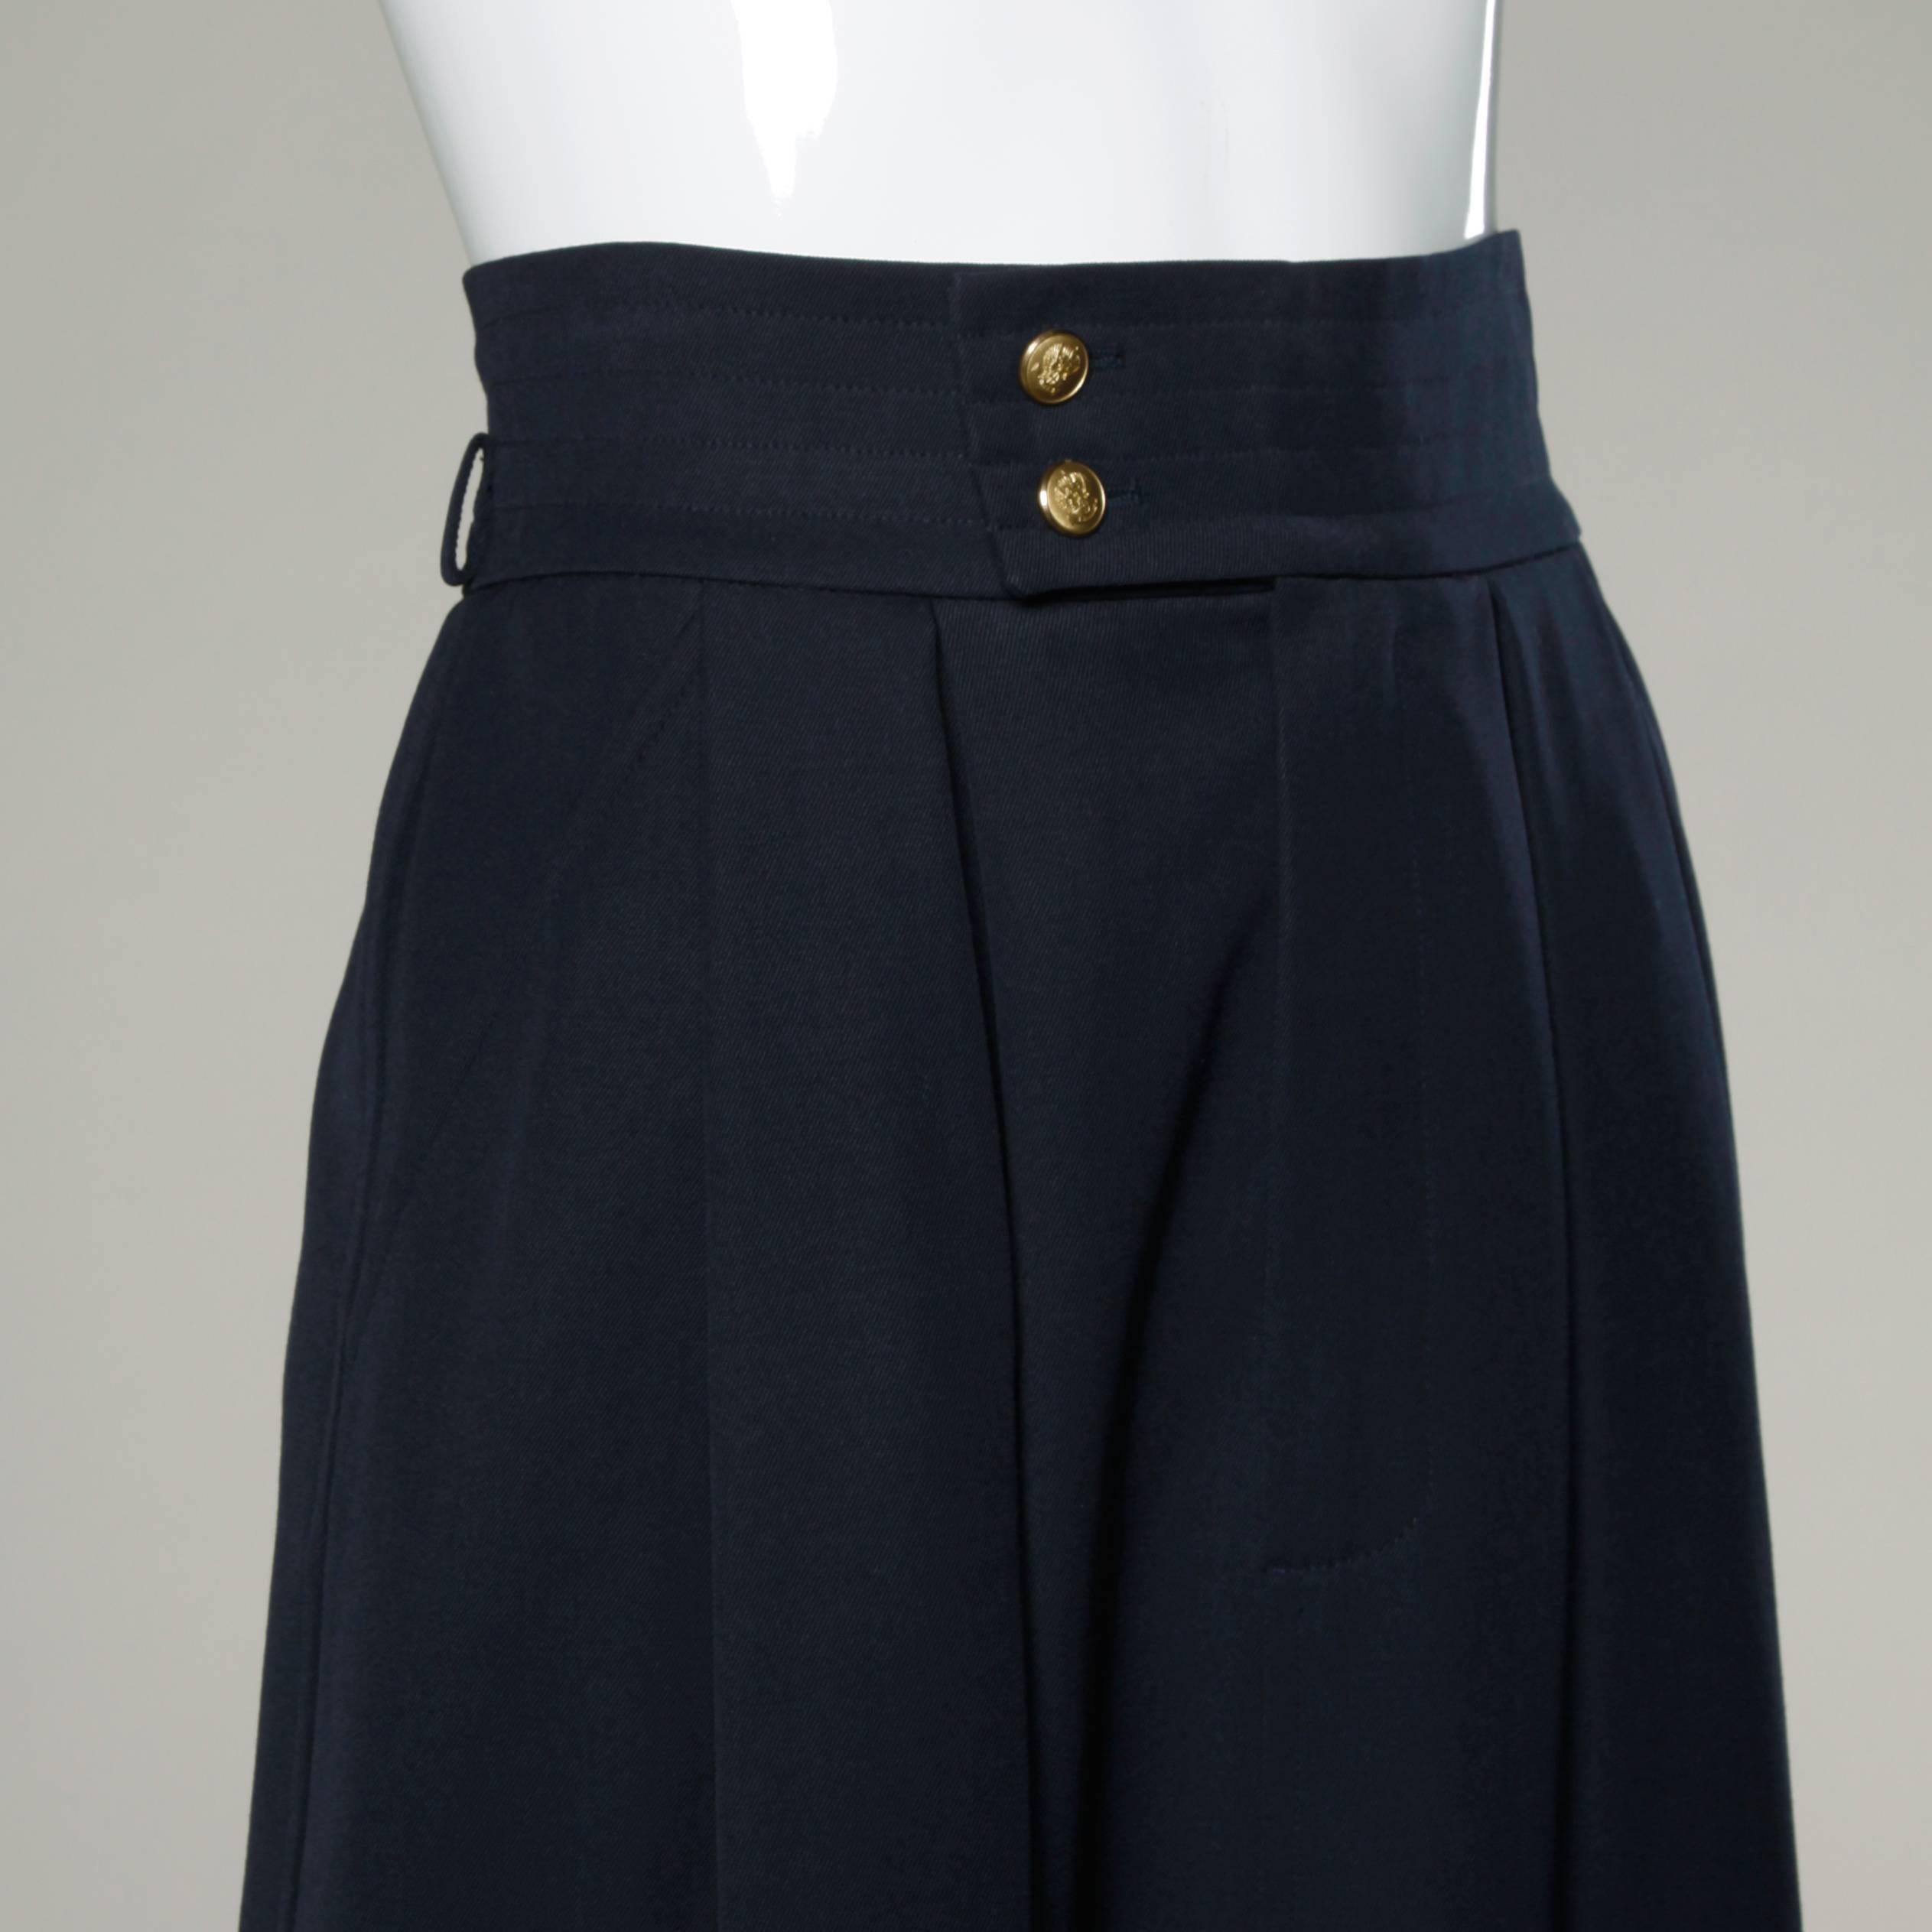 Vintage navy wool midi skirt with two front box pleats by Saint-Laurent.

Details:

Fully Lined
Front Pockets
Front Button and Hook Closure
Marked Size: F 36
Estimated Size: Small
Color: Navy Blue
Fabric: Wool
Label: Saint Laurent